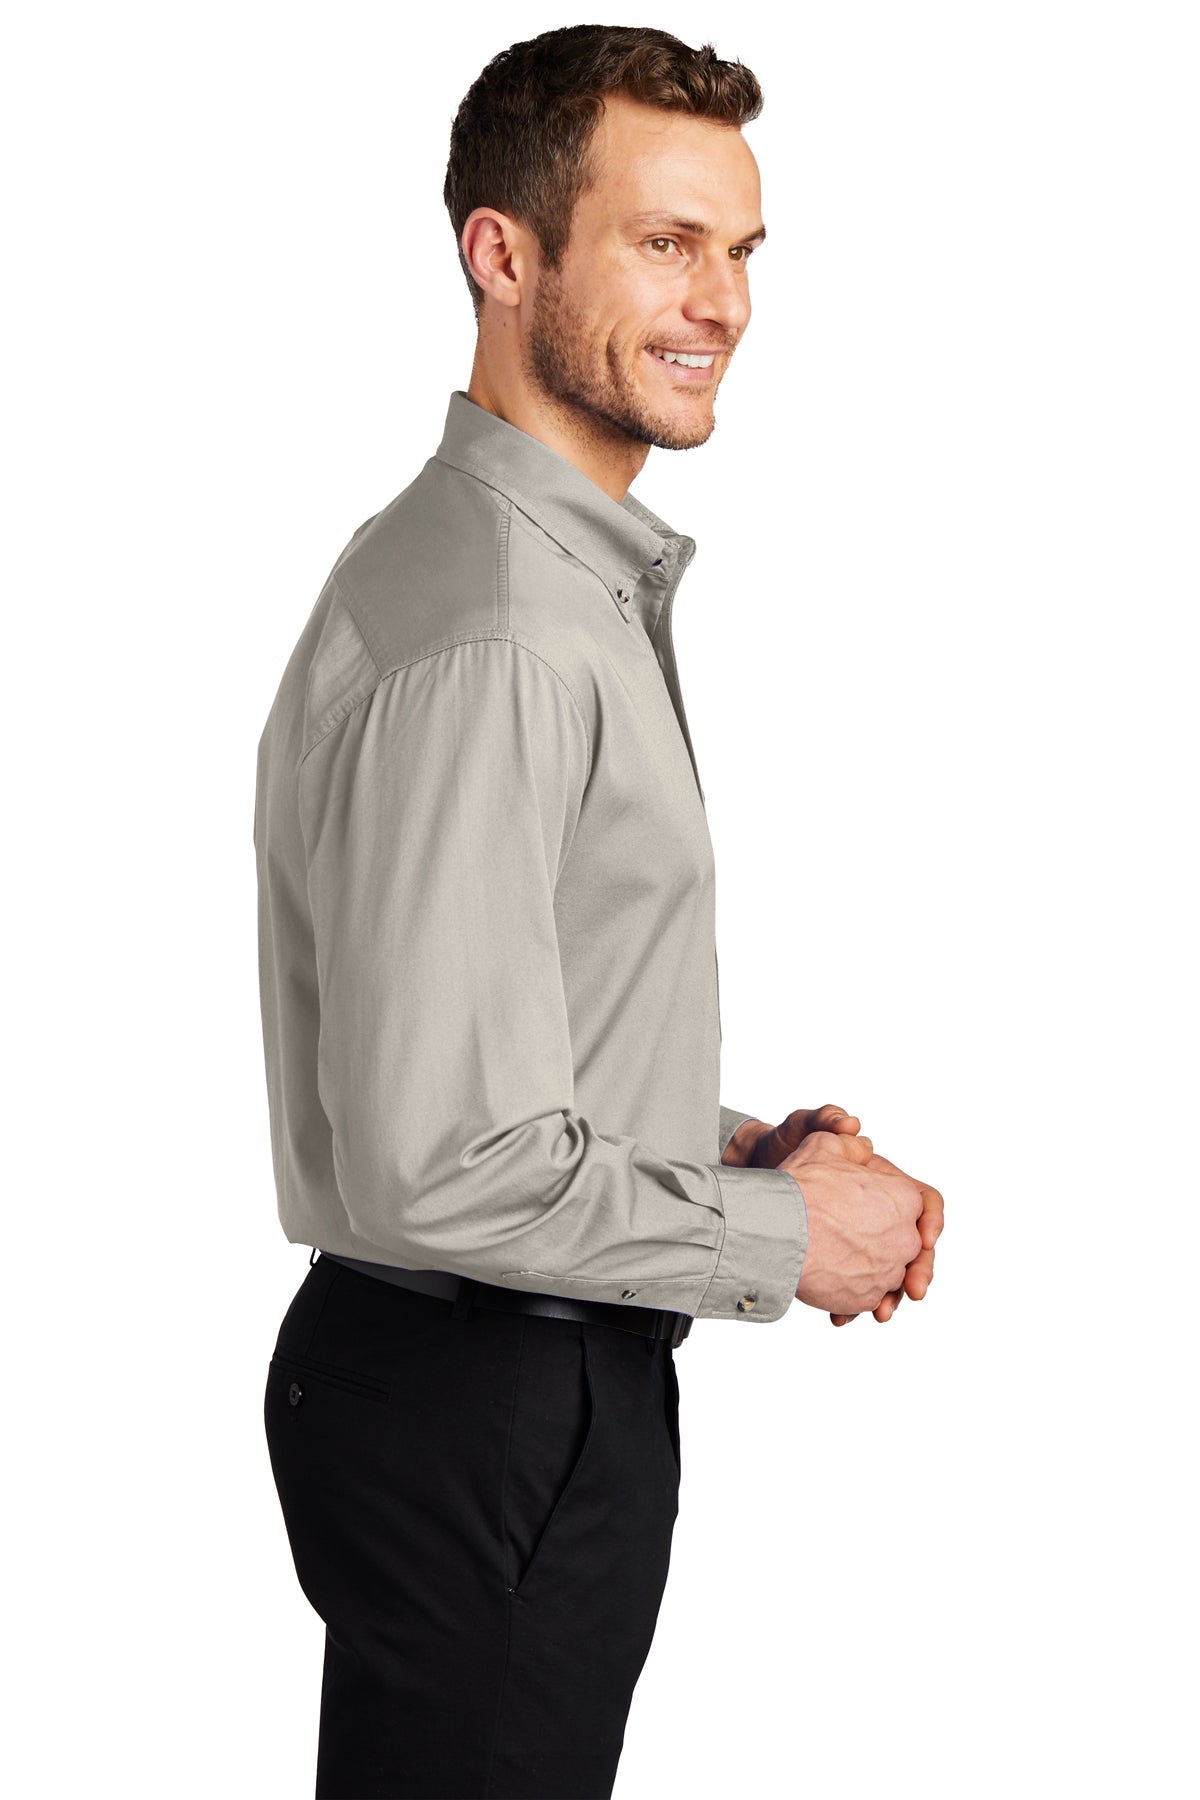 port authority_s600t _stone_company_logo_button downs